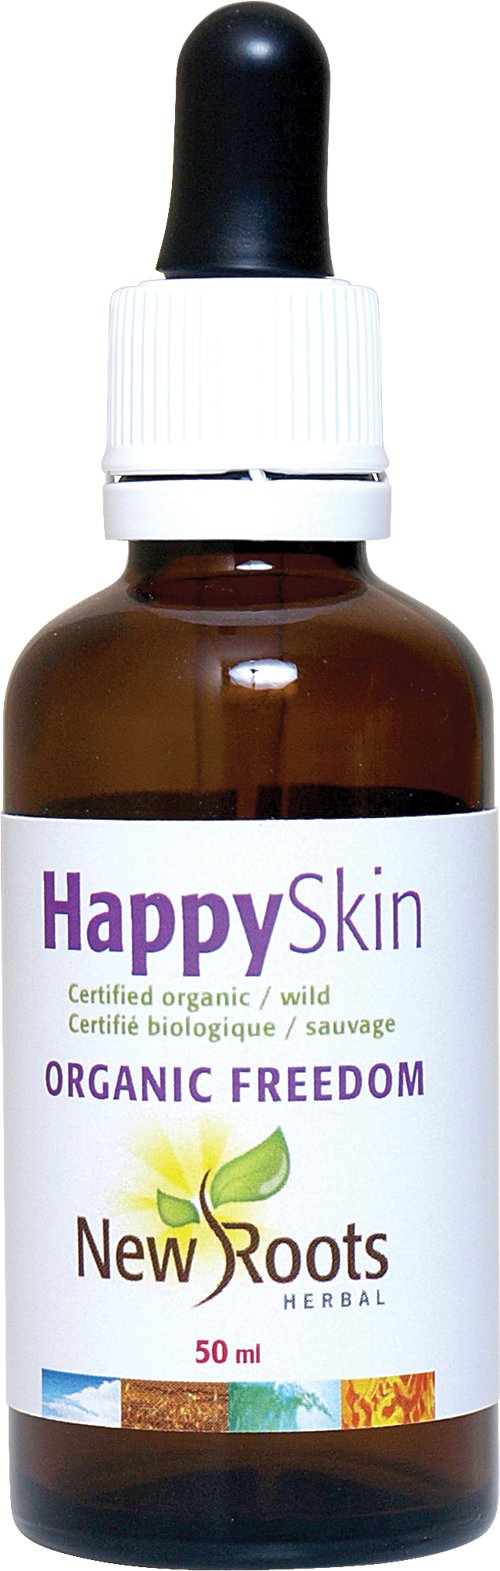 New Roots Happy Skin 50 mL Image 1